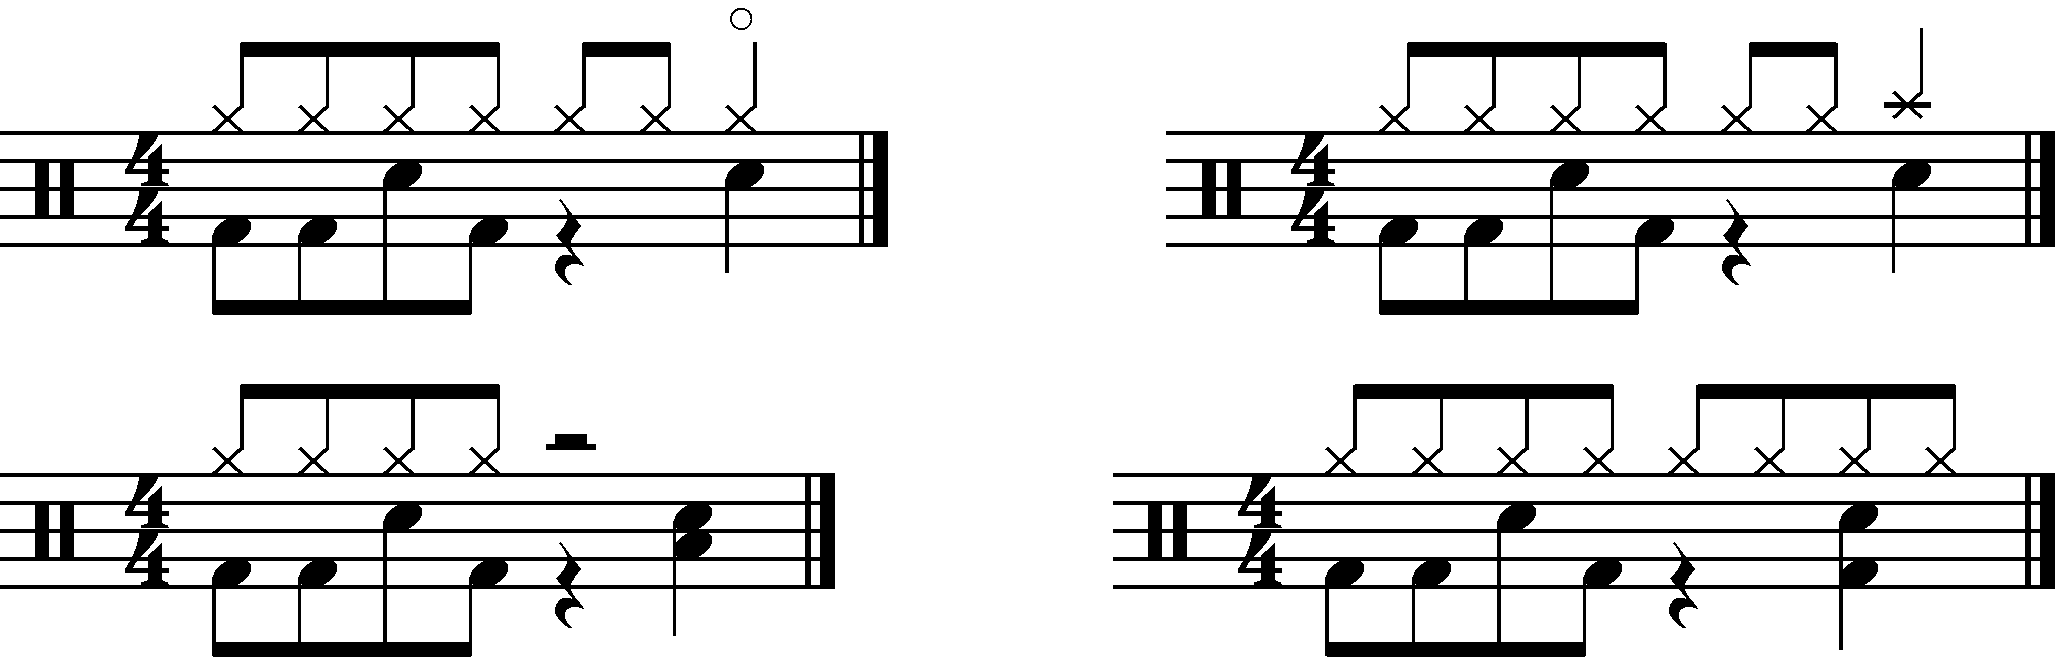 Four options for the 'B' section